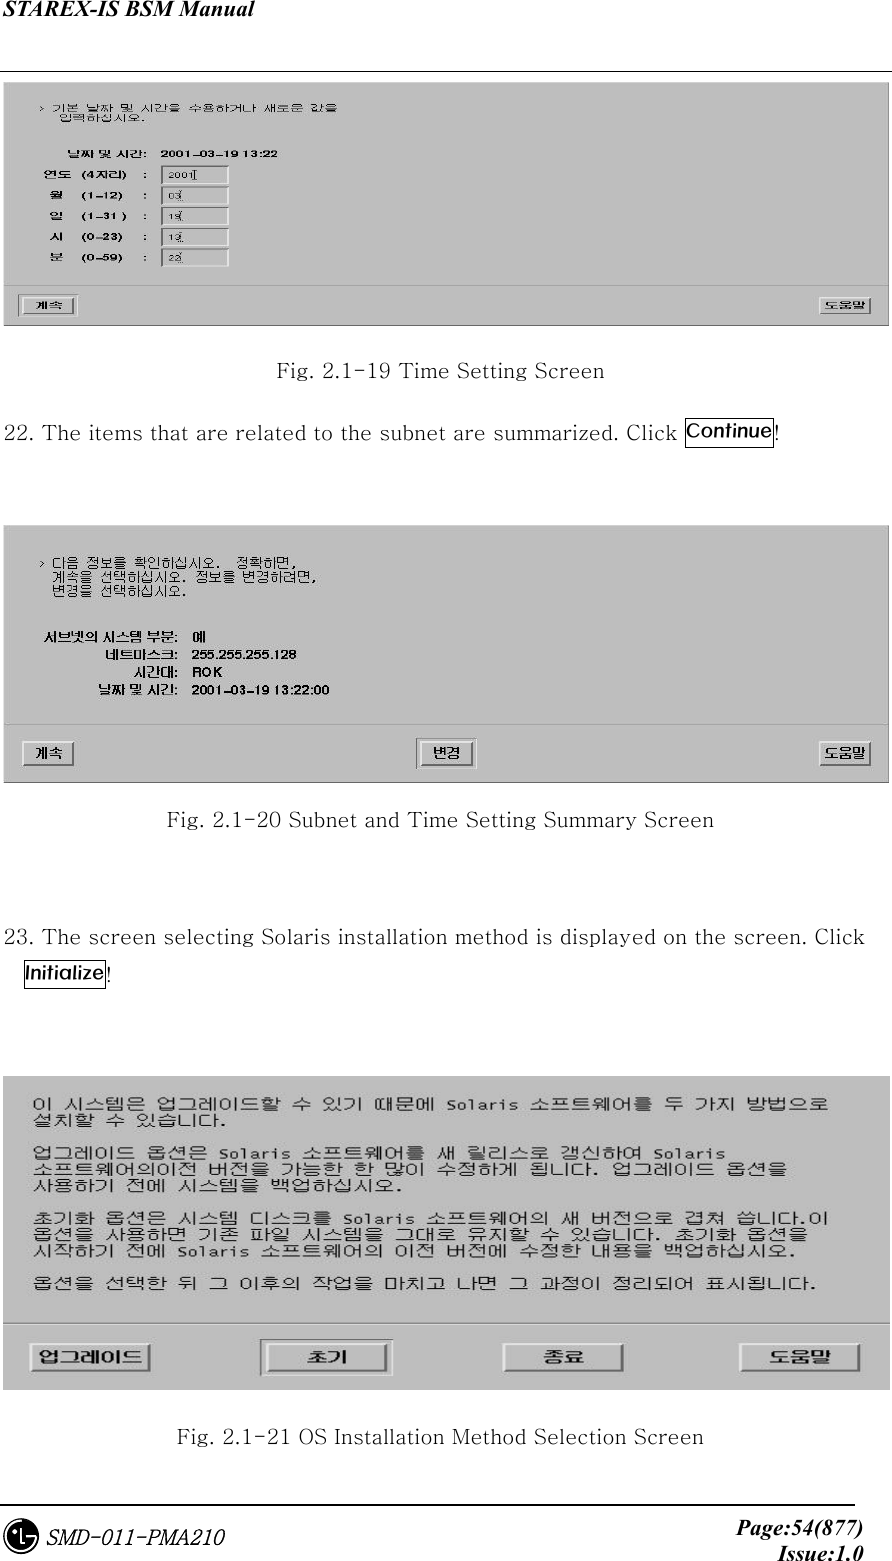 STAREX-IS BSM Manual     Page:54(877)Issue:1.0SMD-011-PMA210  Fig. 2.1-19 Time Setting Screen   22. The items that are related to the subnet are summarized. Click Continue!   Fig. 2.1-20 Subnet and Time Setting Summary Screen  23. The screen selecting Solaris installation method is displayed on the screen. Click   Initialize!   Fig. 2.1-21 OS Installation Method Selection Screen 